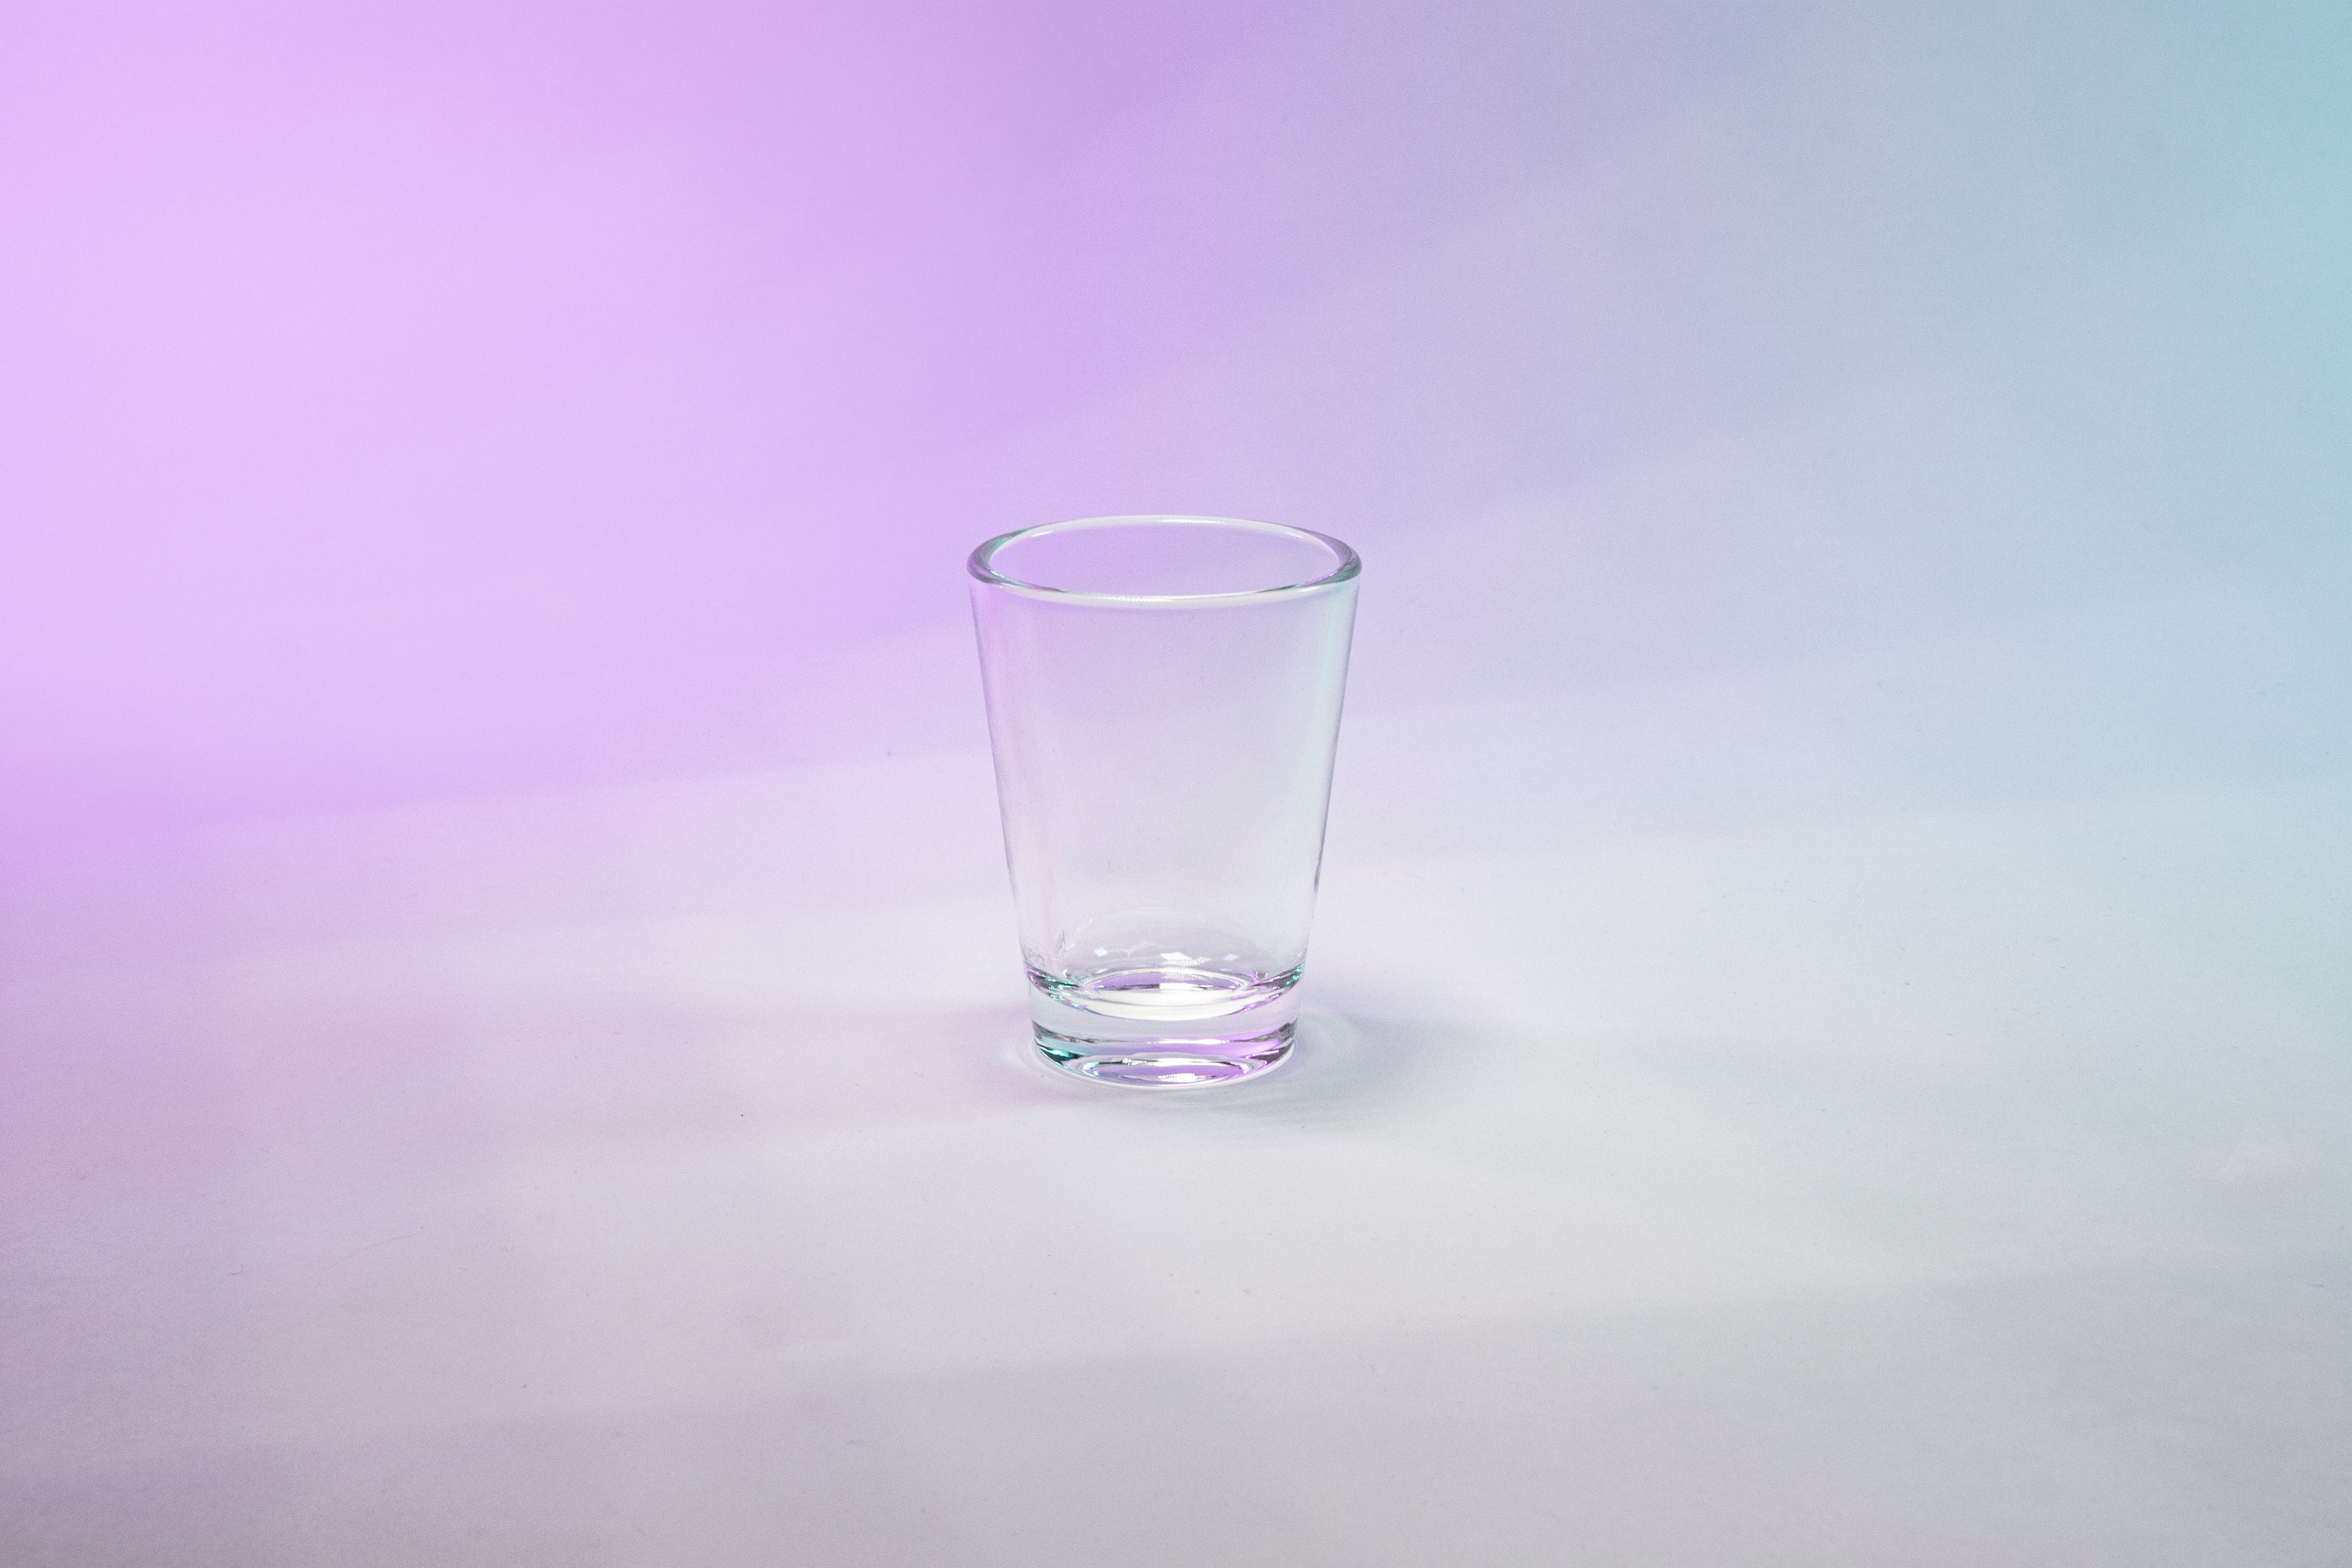 Clear shot glass against purple to blue gradient background.